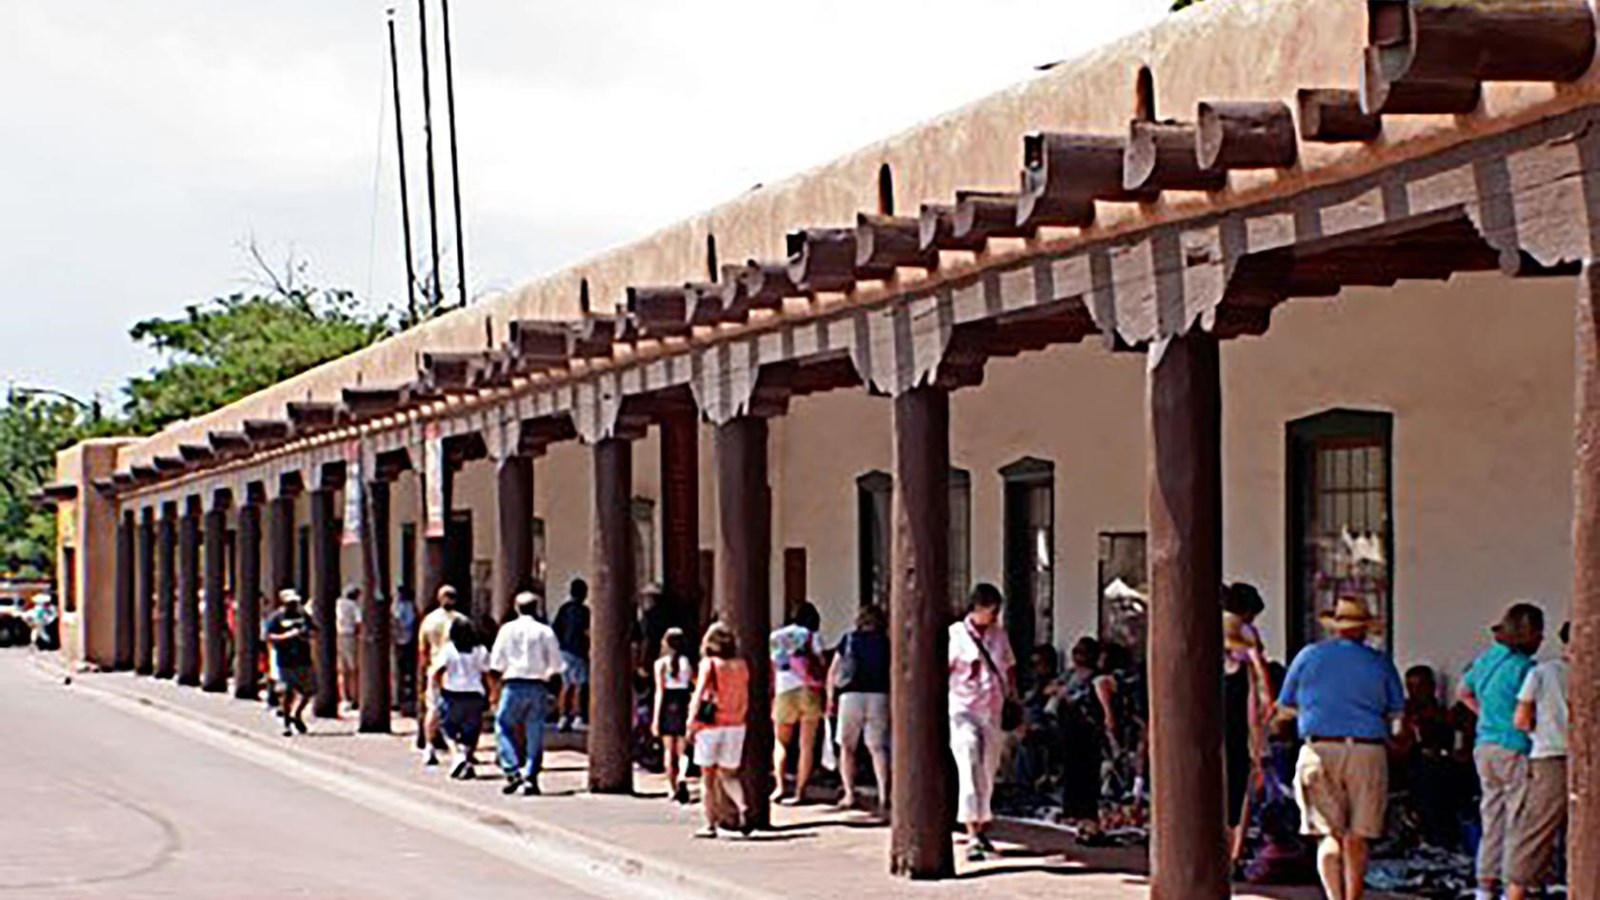 People walk under the hacienda of a one story adobe building